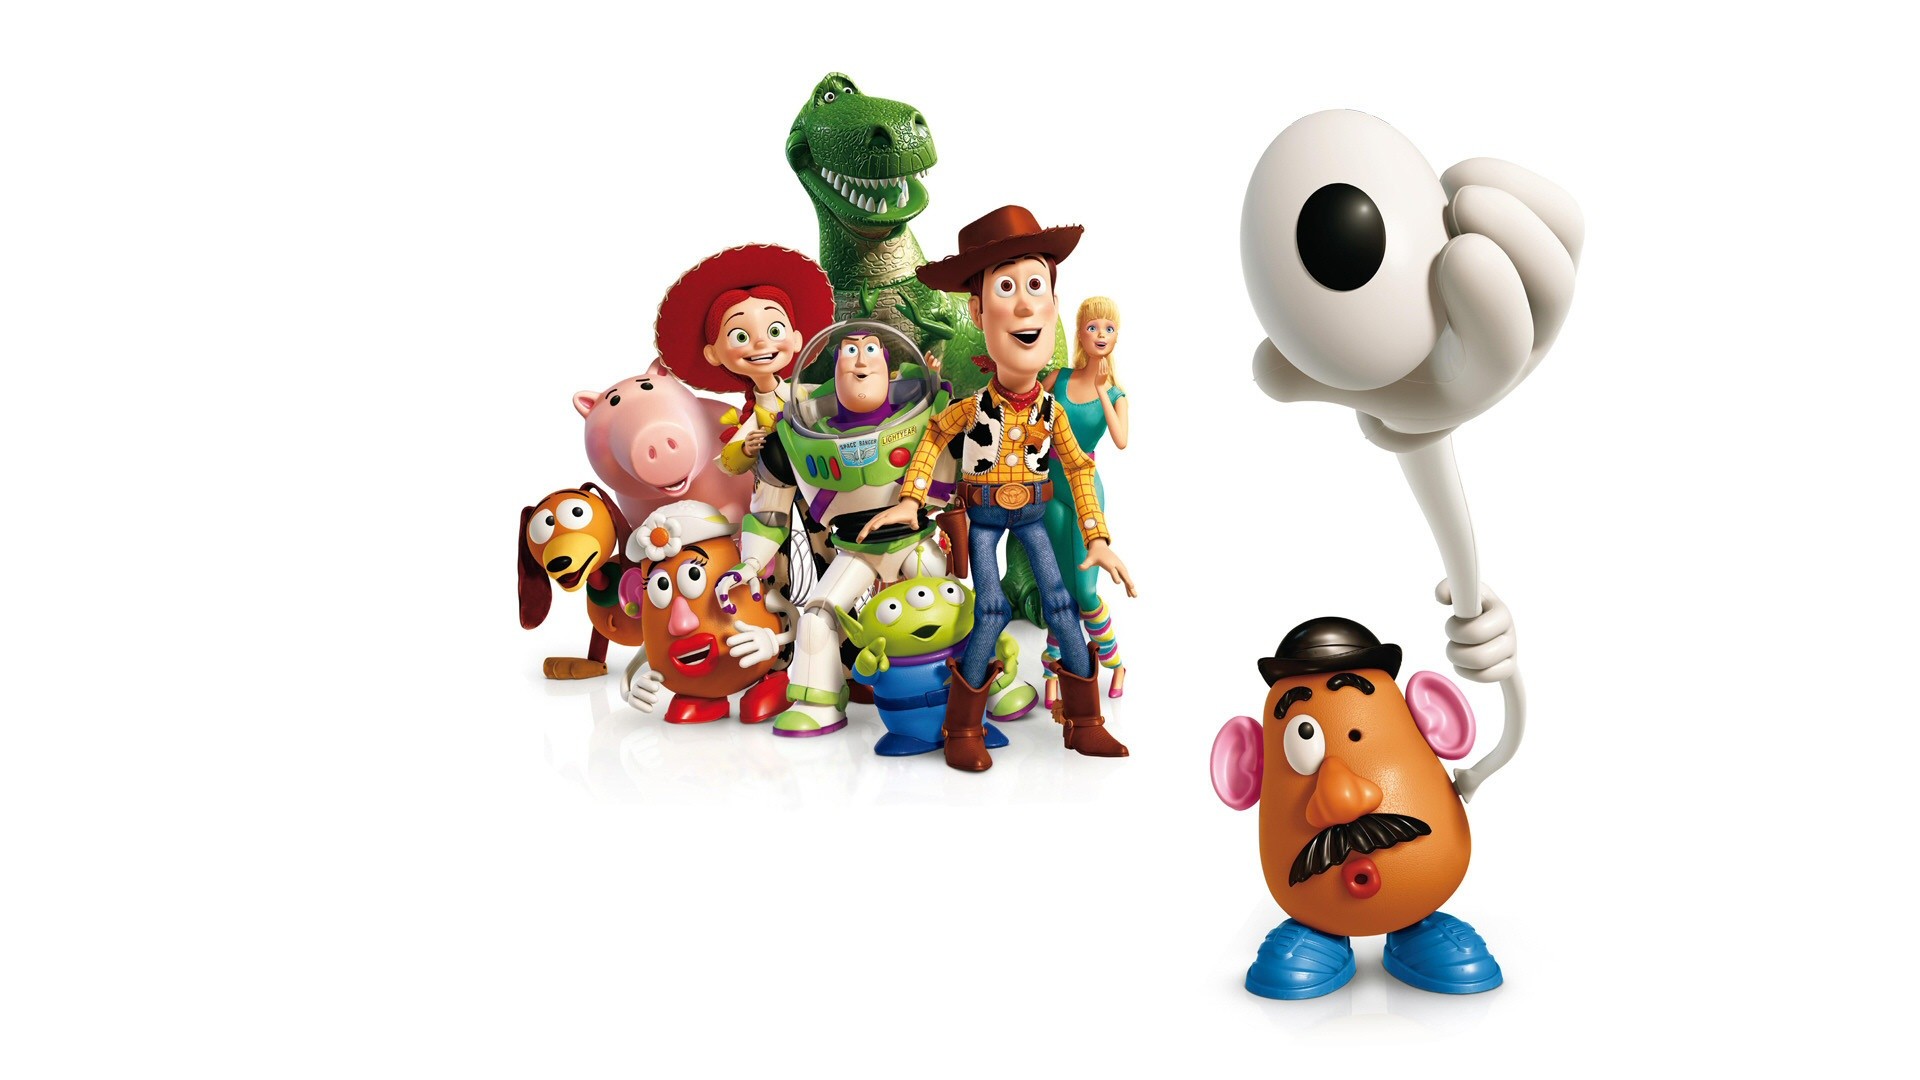 1920x1080 Toy Story 4 kommt 2017